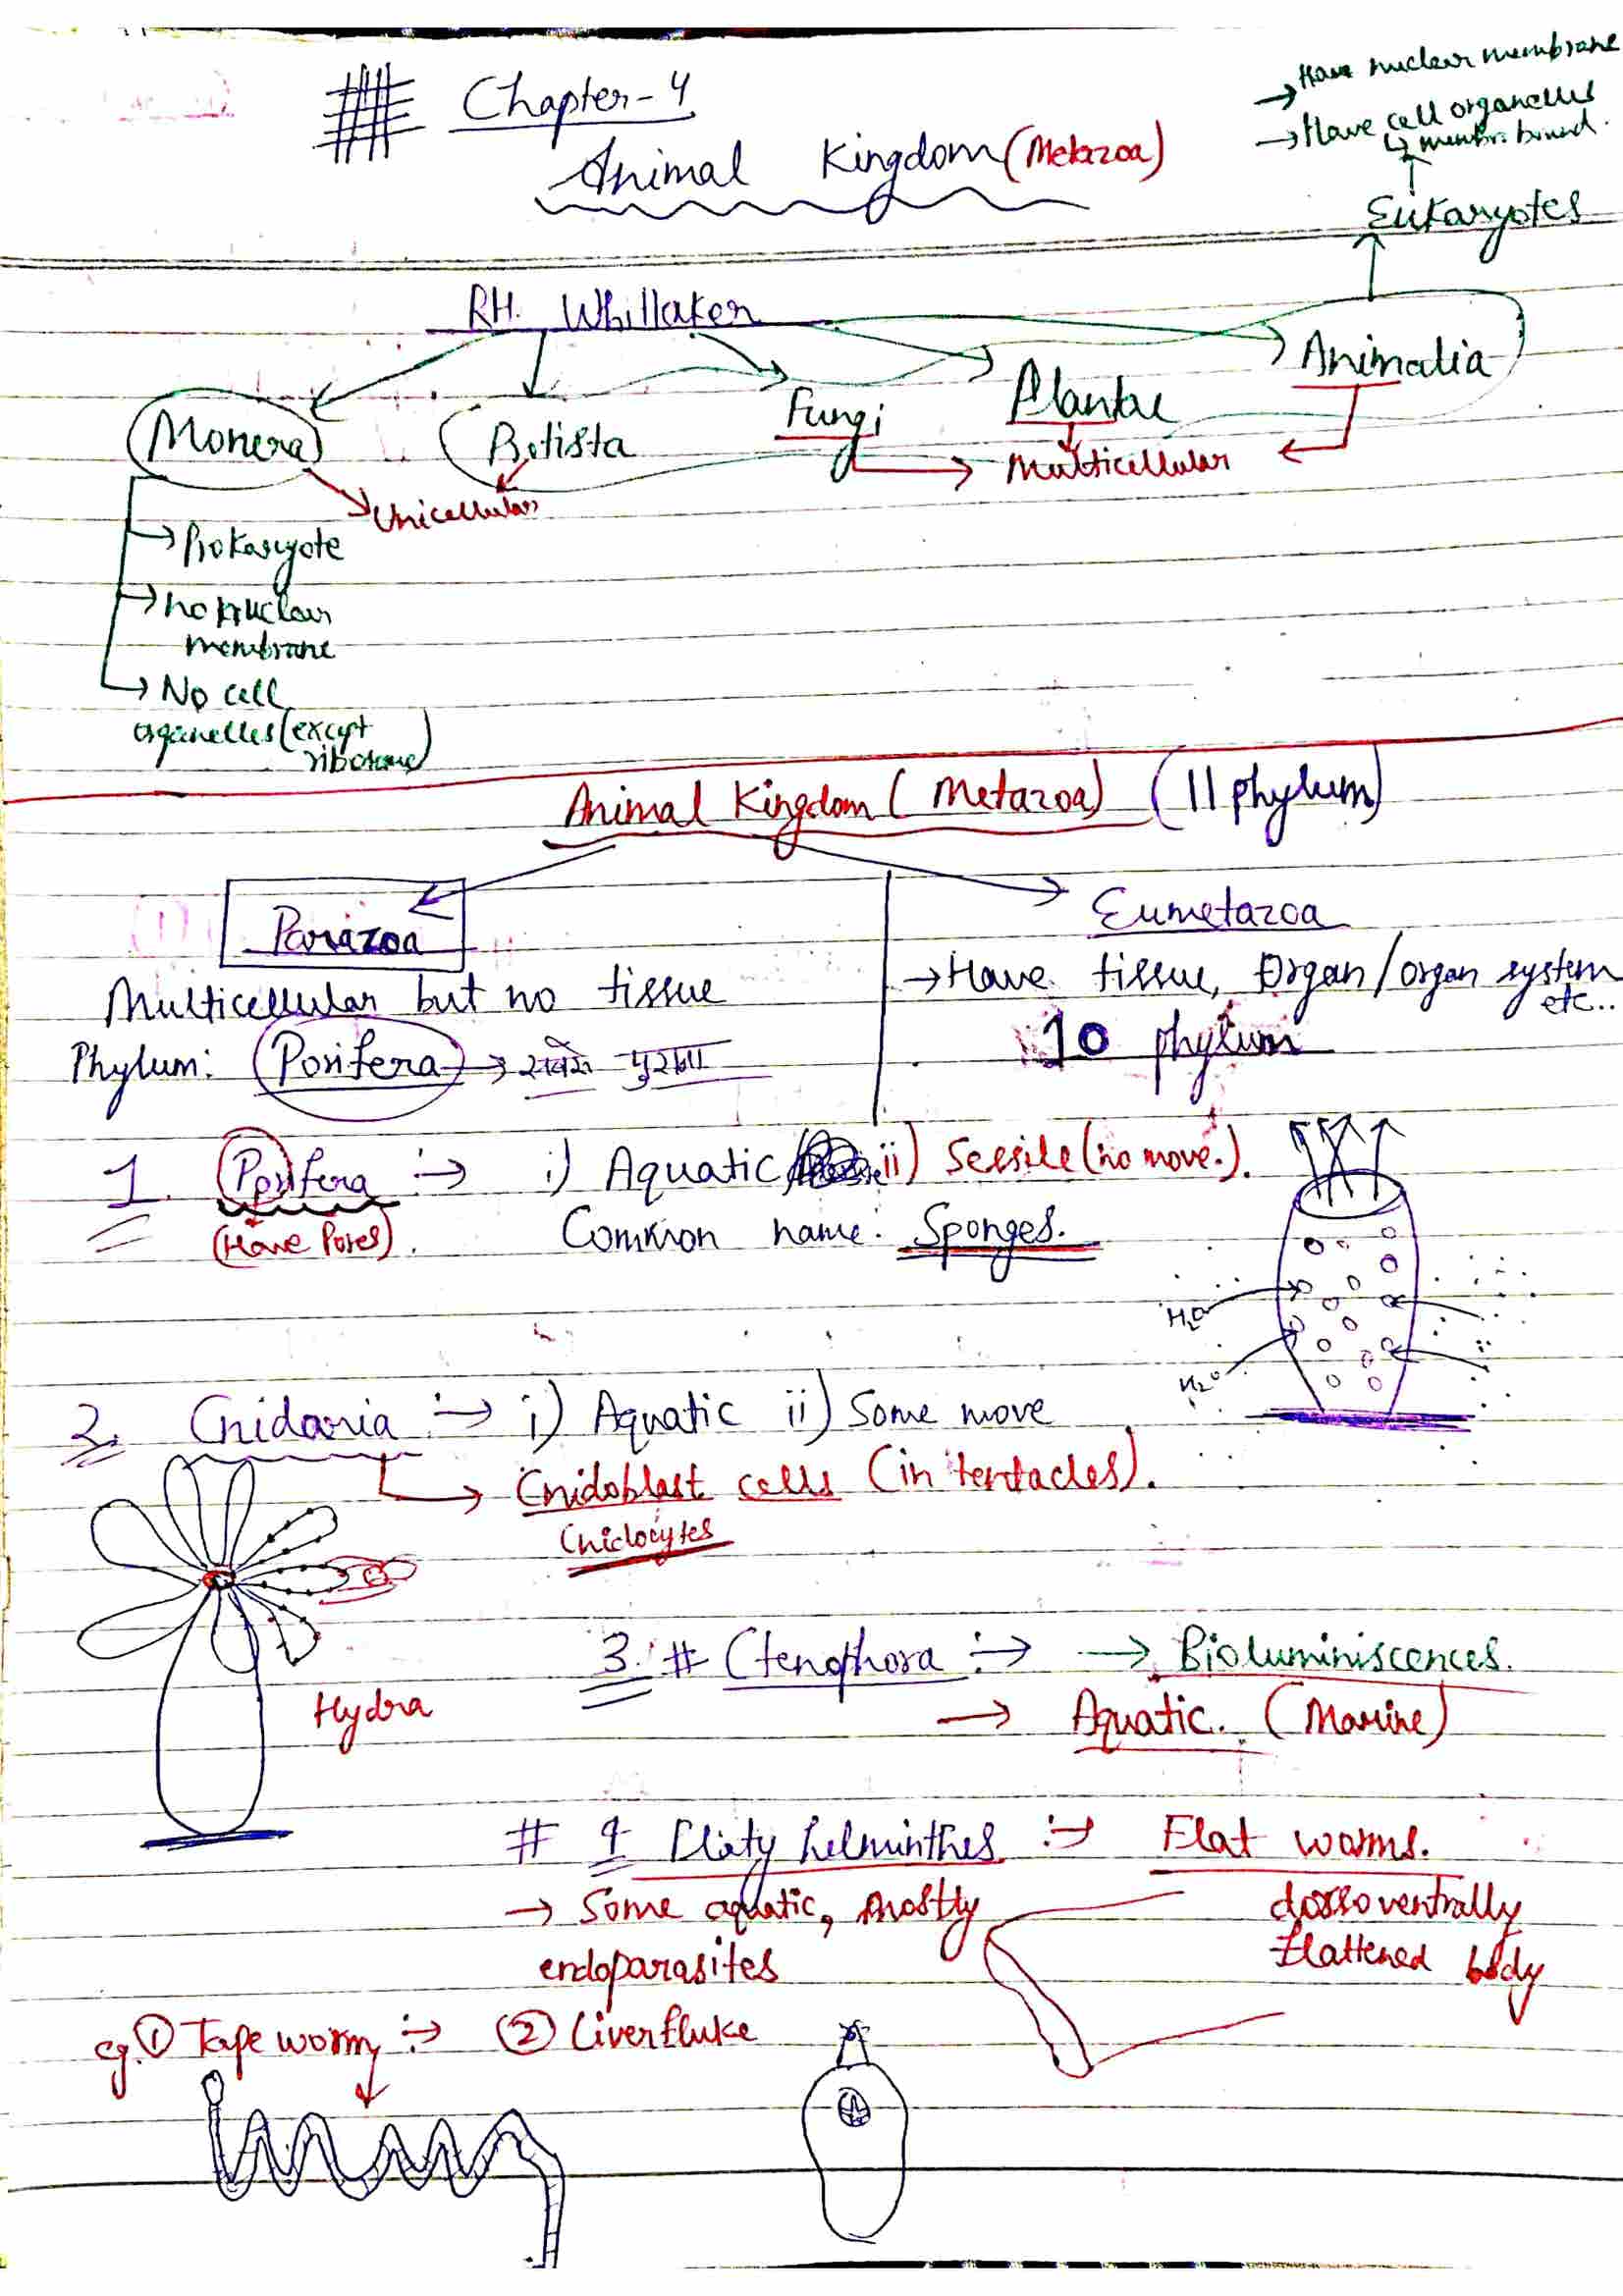 Chapter-4: Animal Kingdom class 12 Chemistry notes for cbse board and NEET